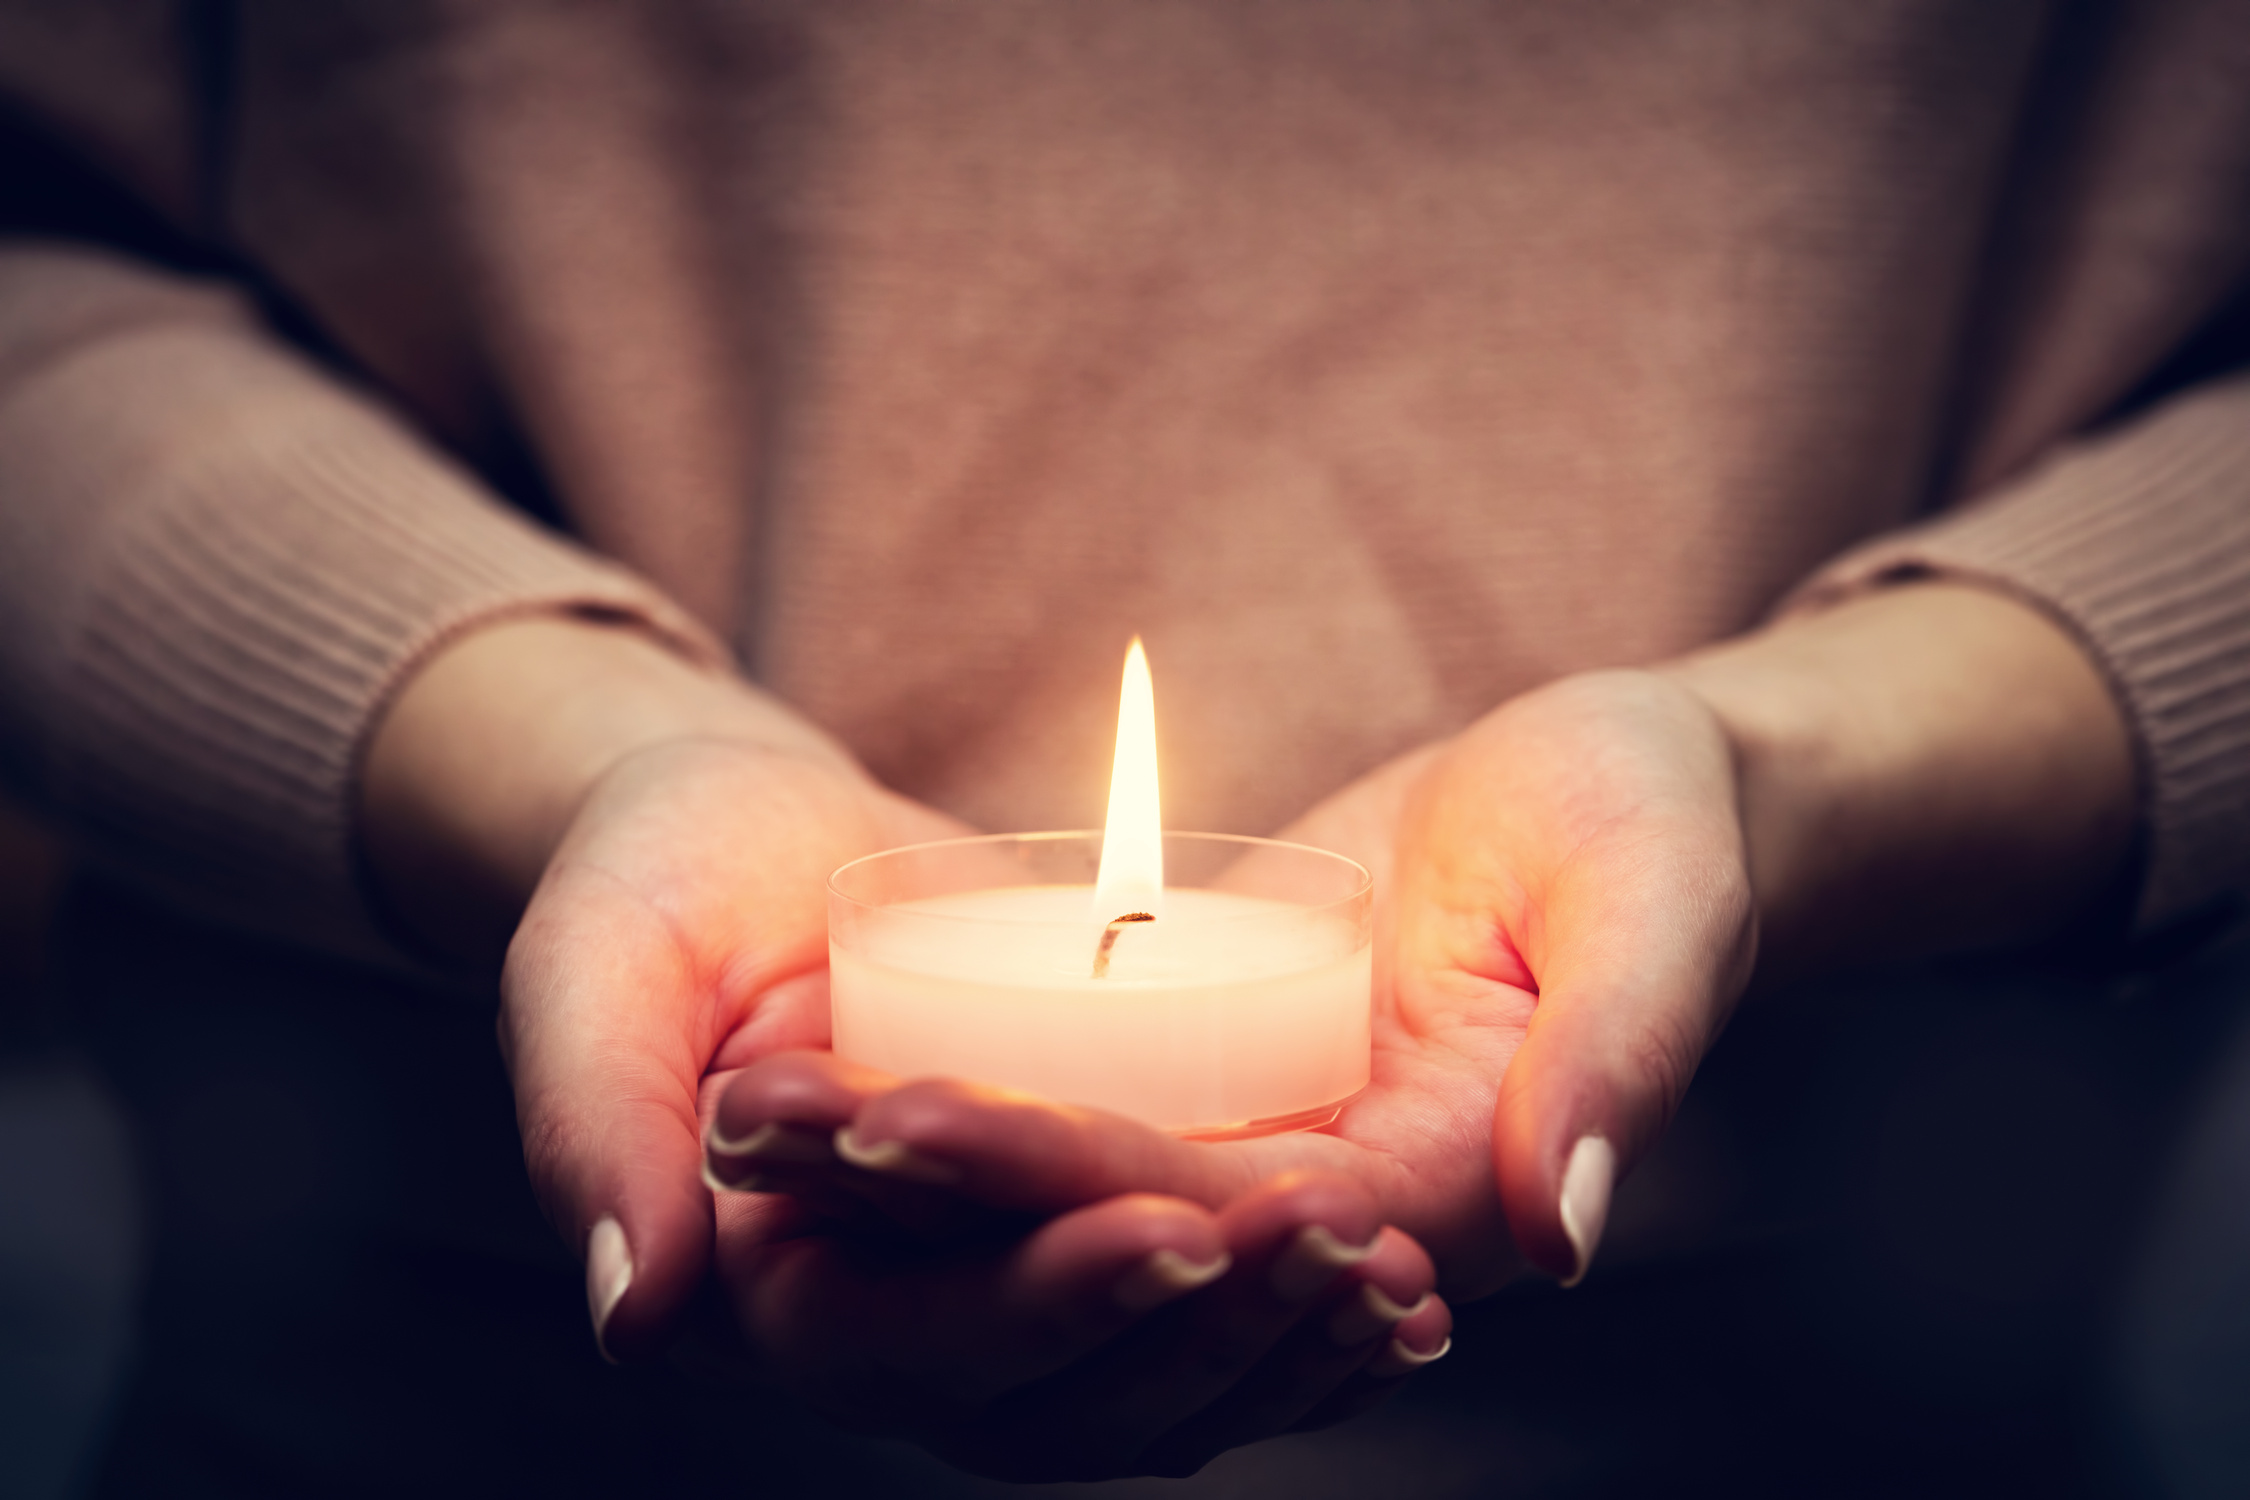 Candle Light Glowing in Woman's Hands